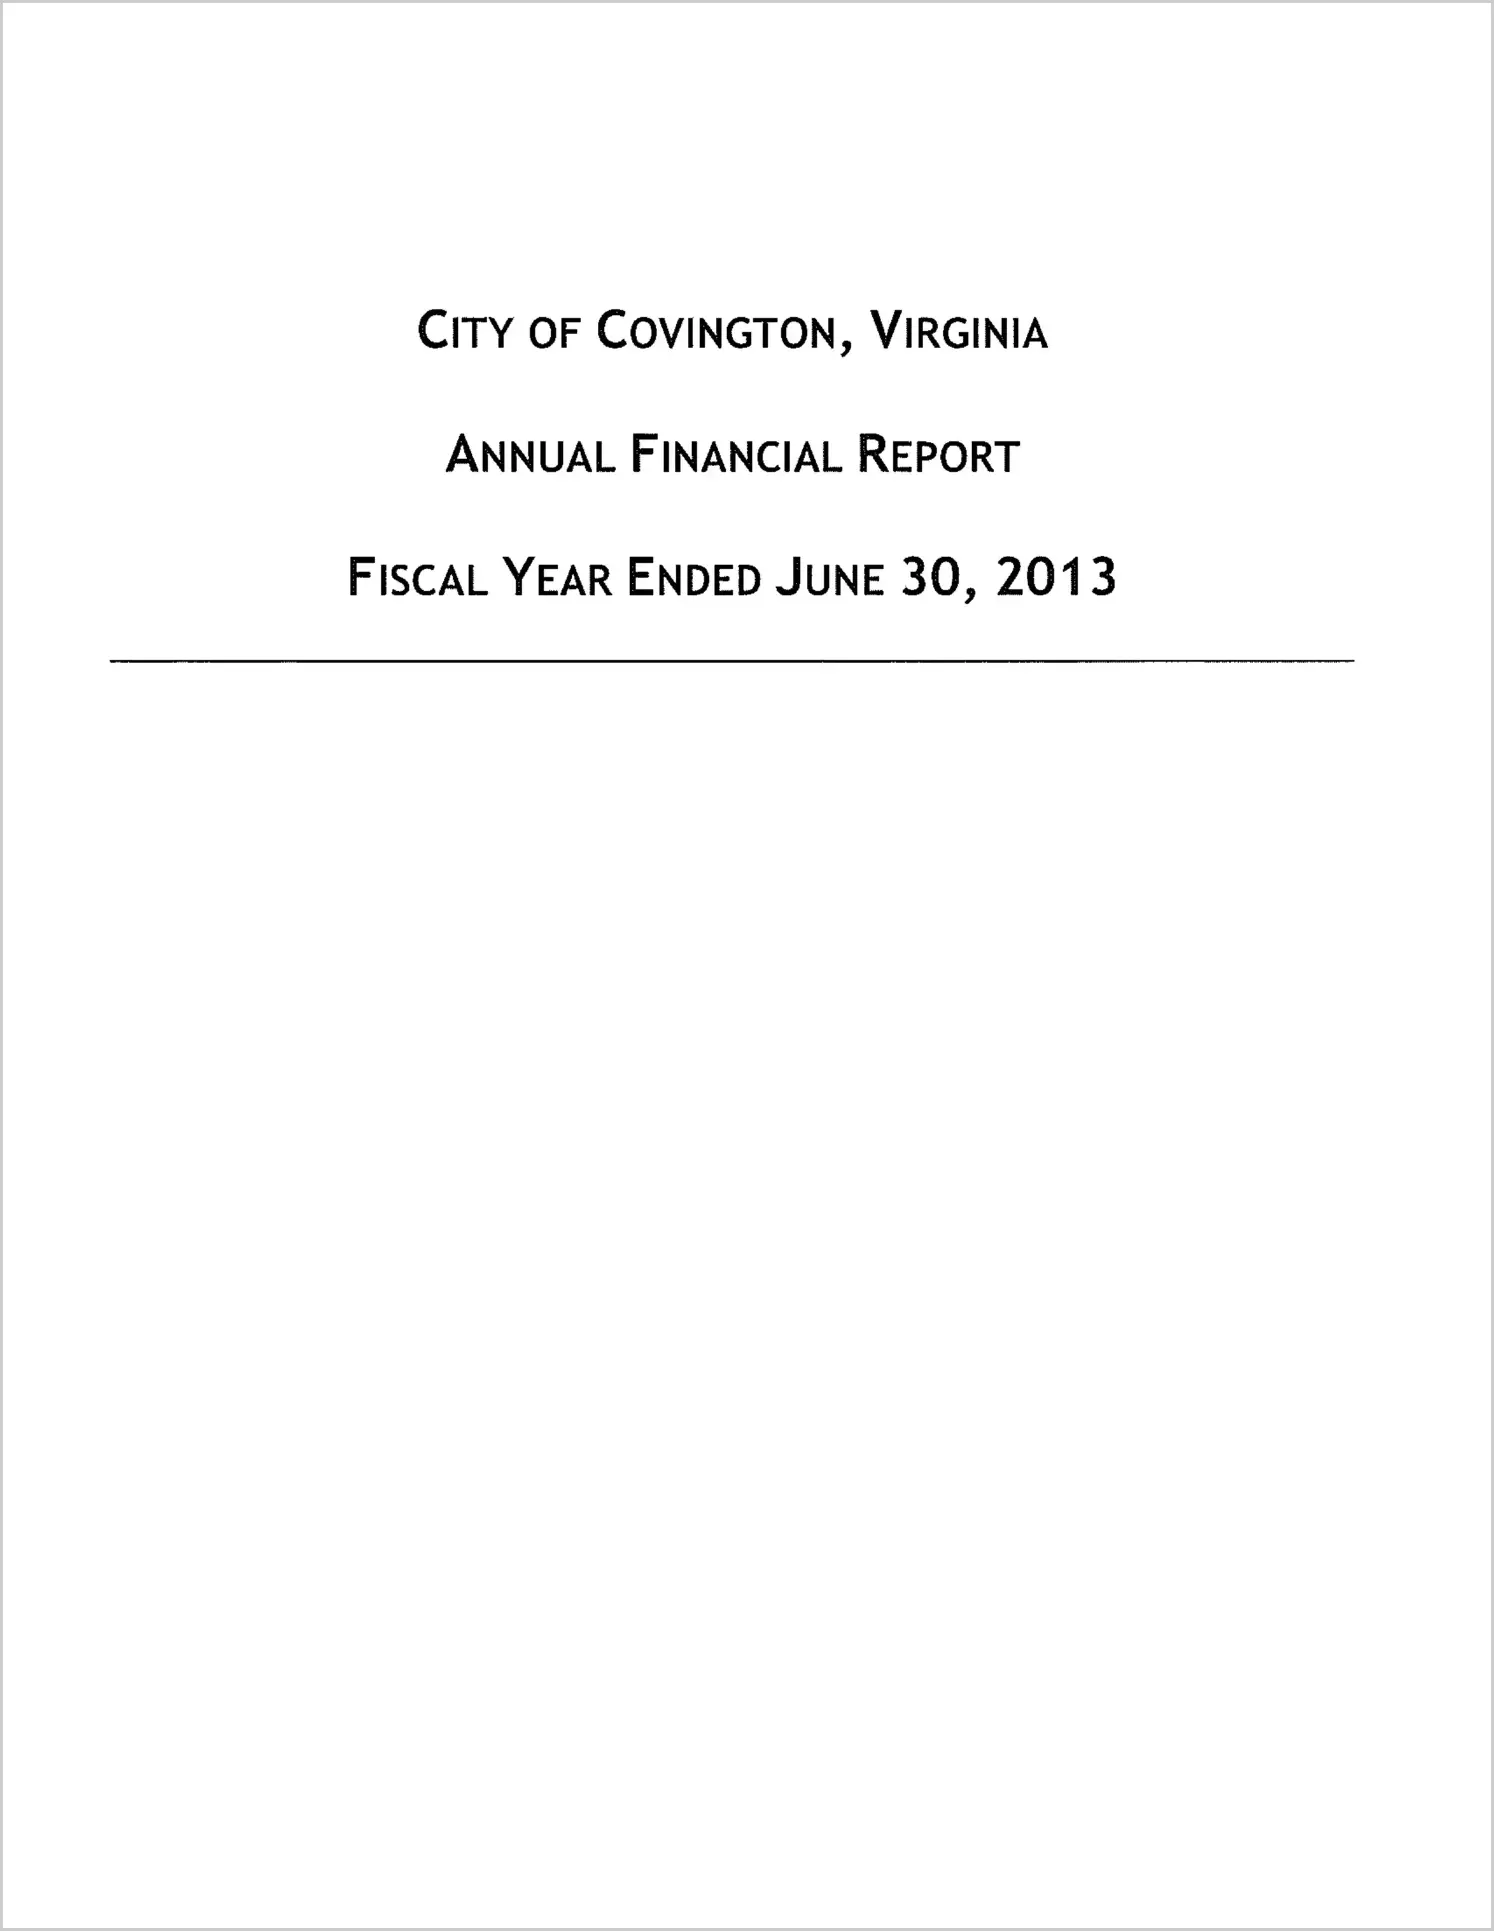 2013 Annual Financial Report for City of Covington